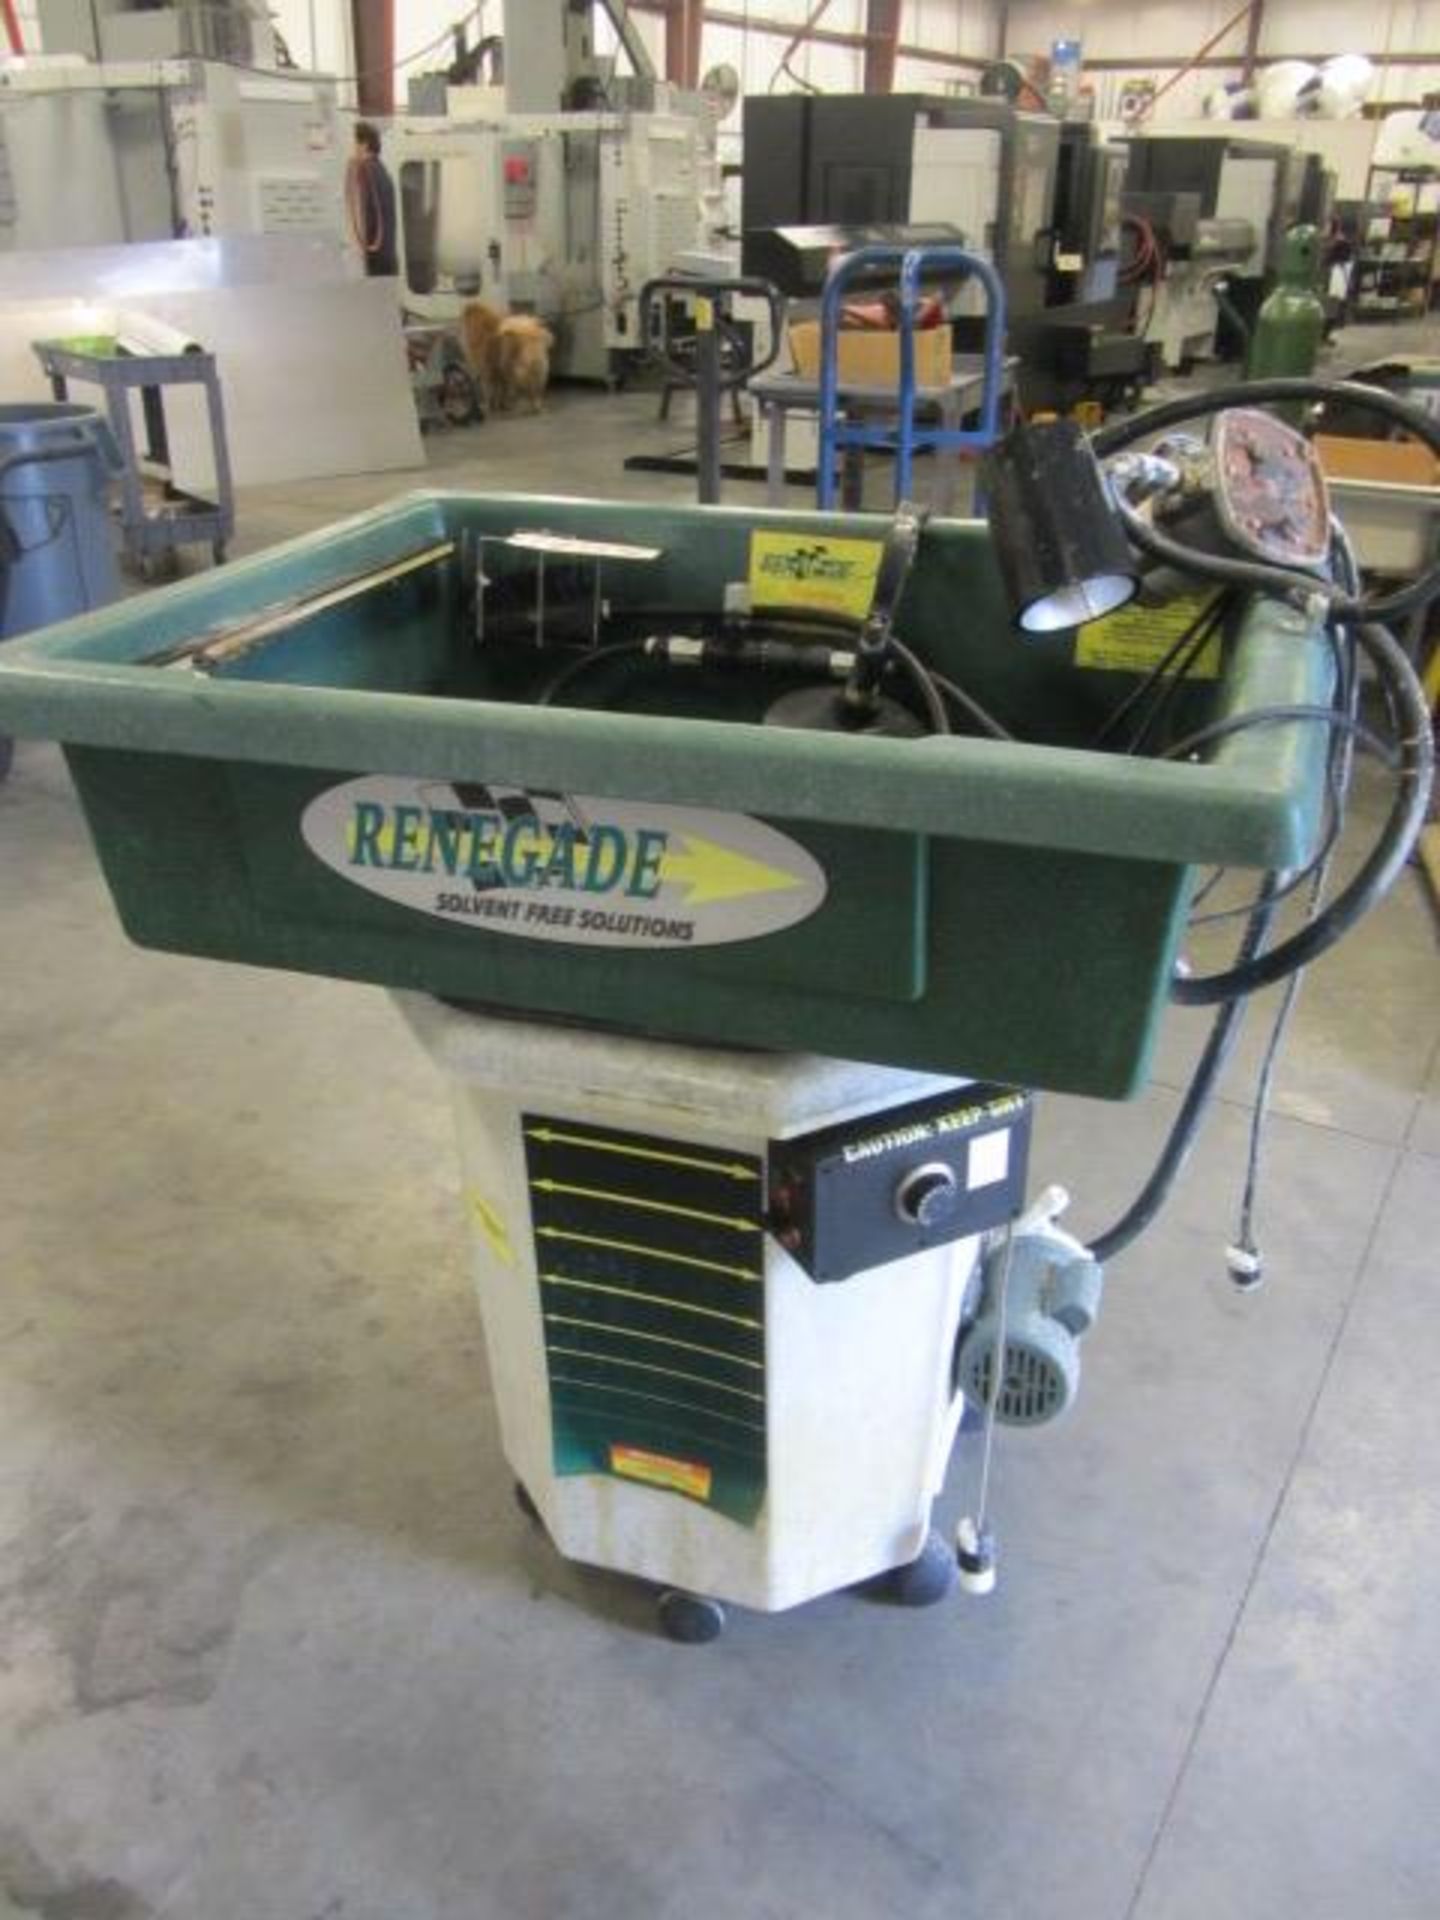 Renegade Portable Parts Washer